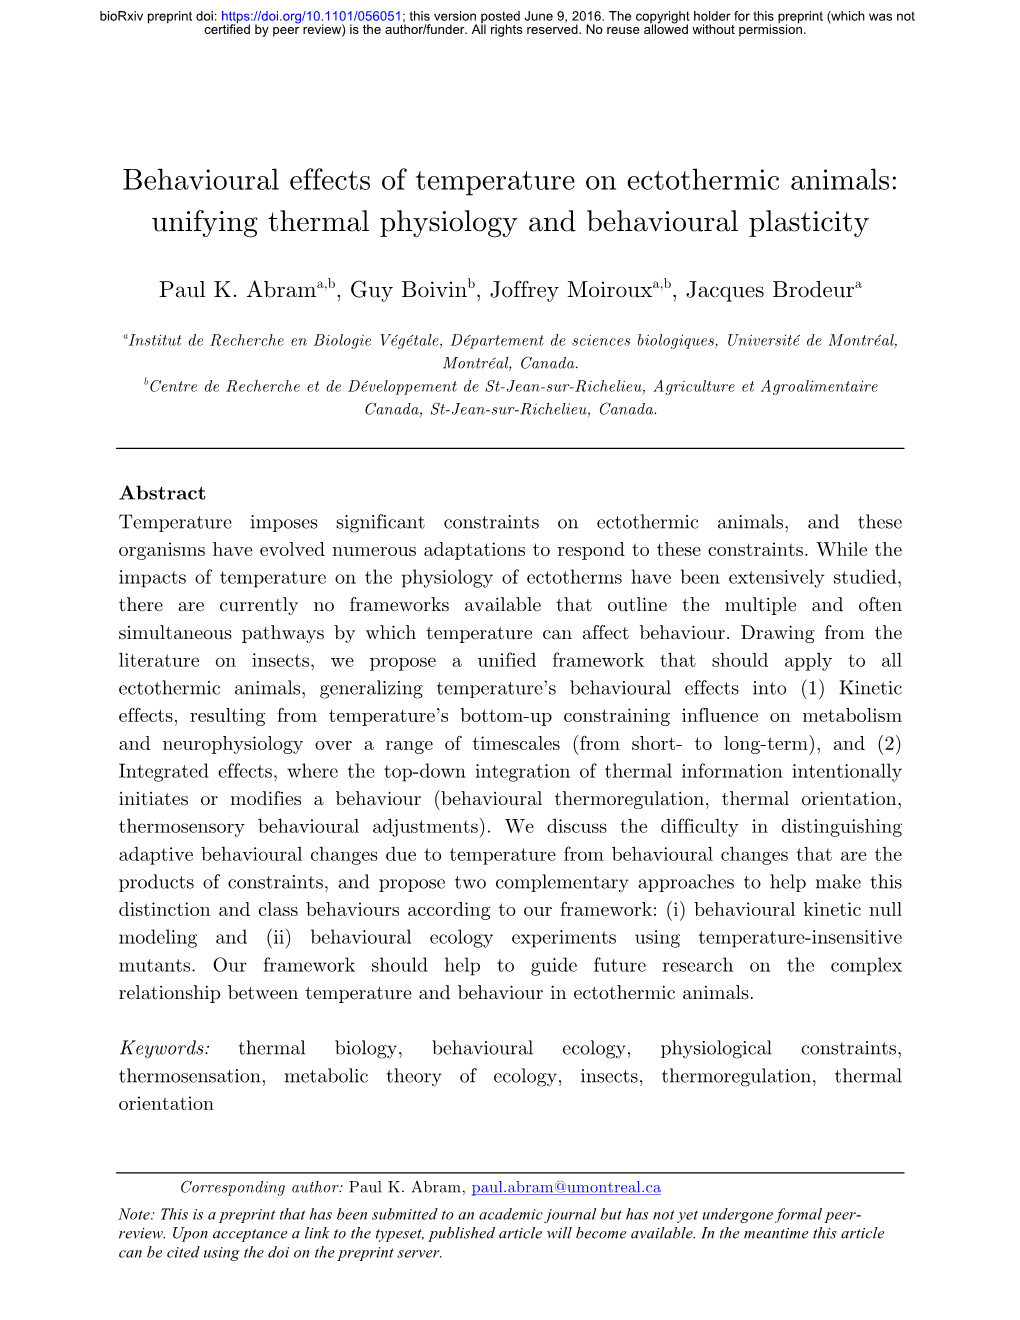 Behavioural Effects of Temperature on Ectothermic Animals: Unifying Thermal Physiology and Behavioural Plasticity